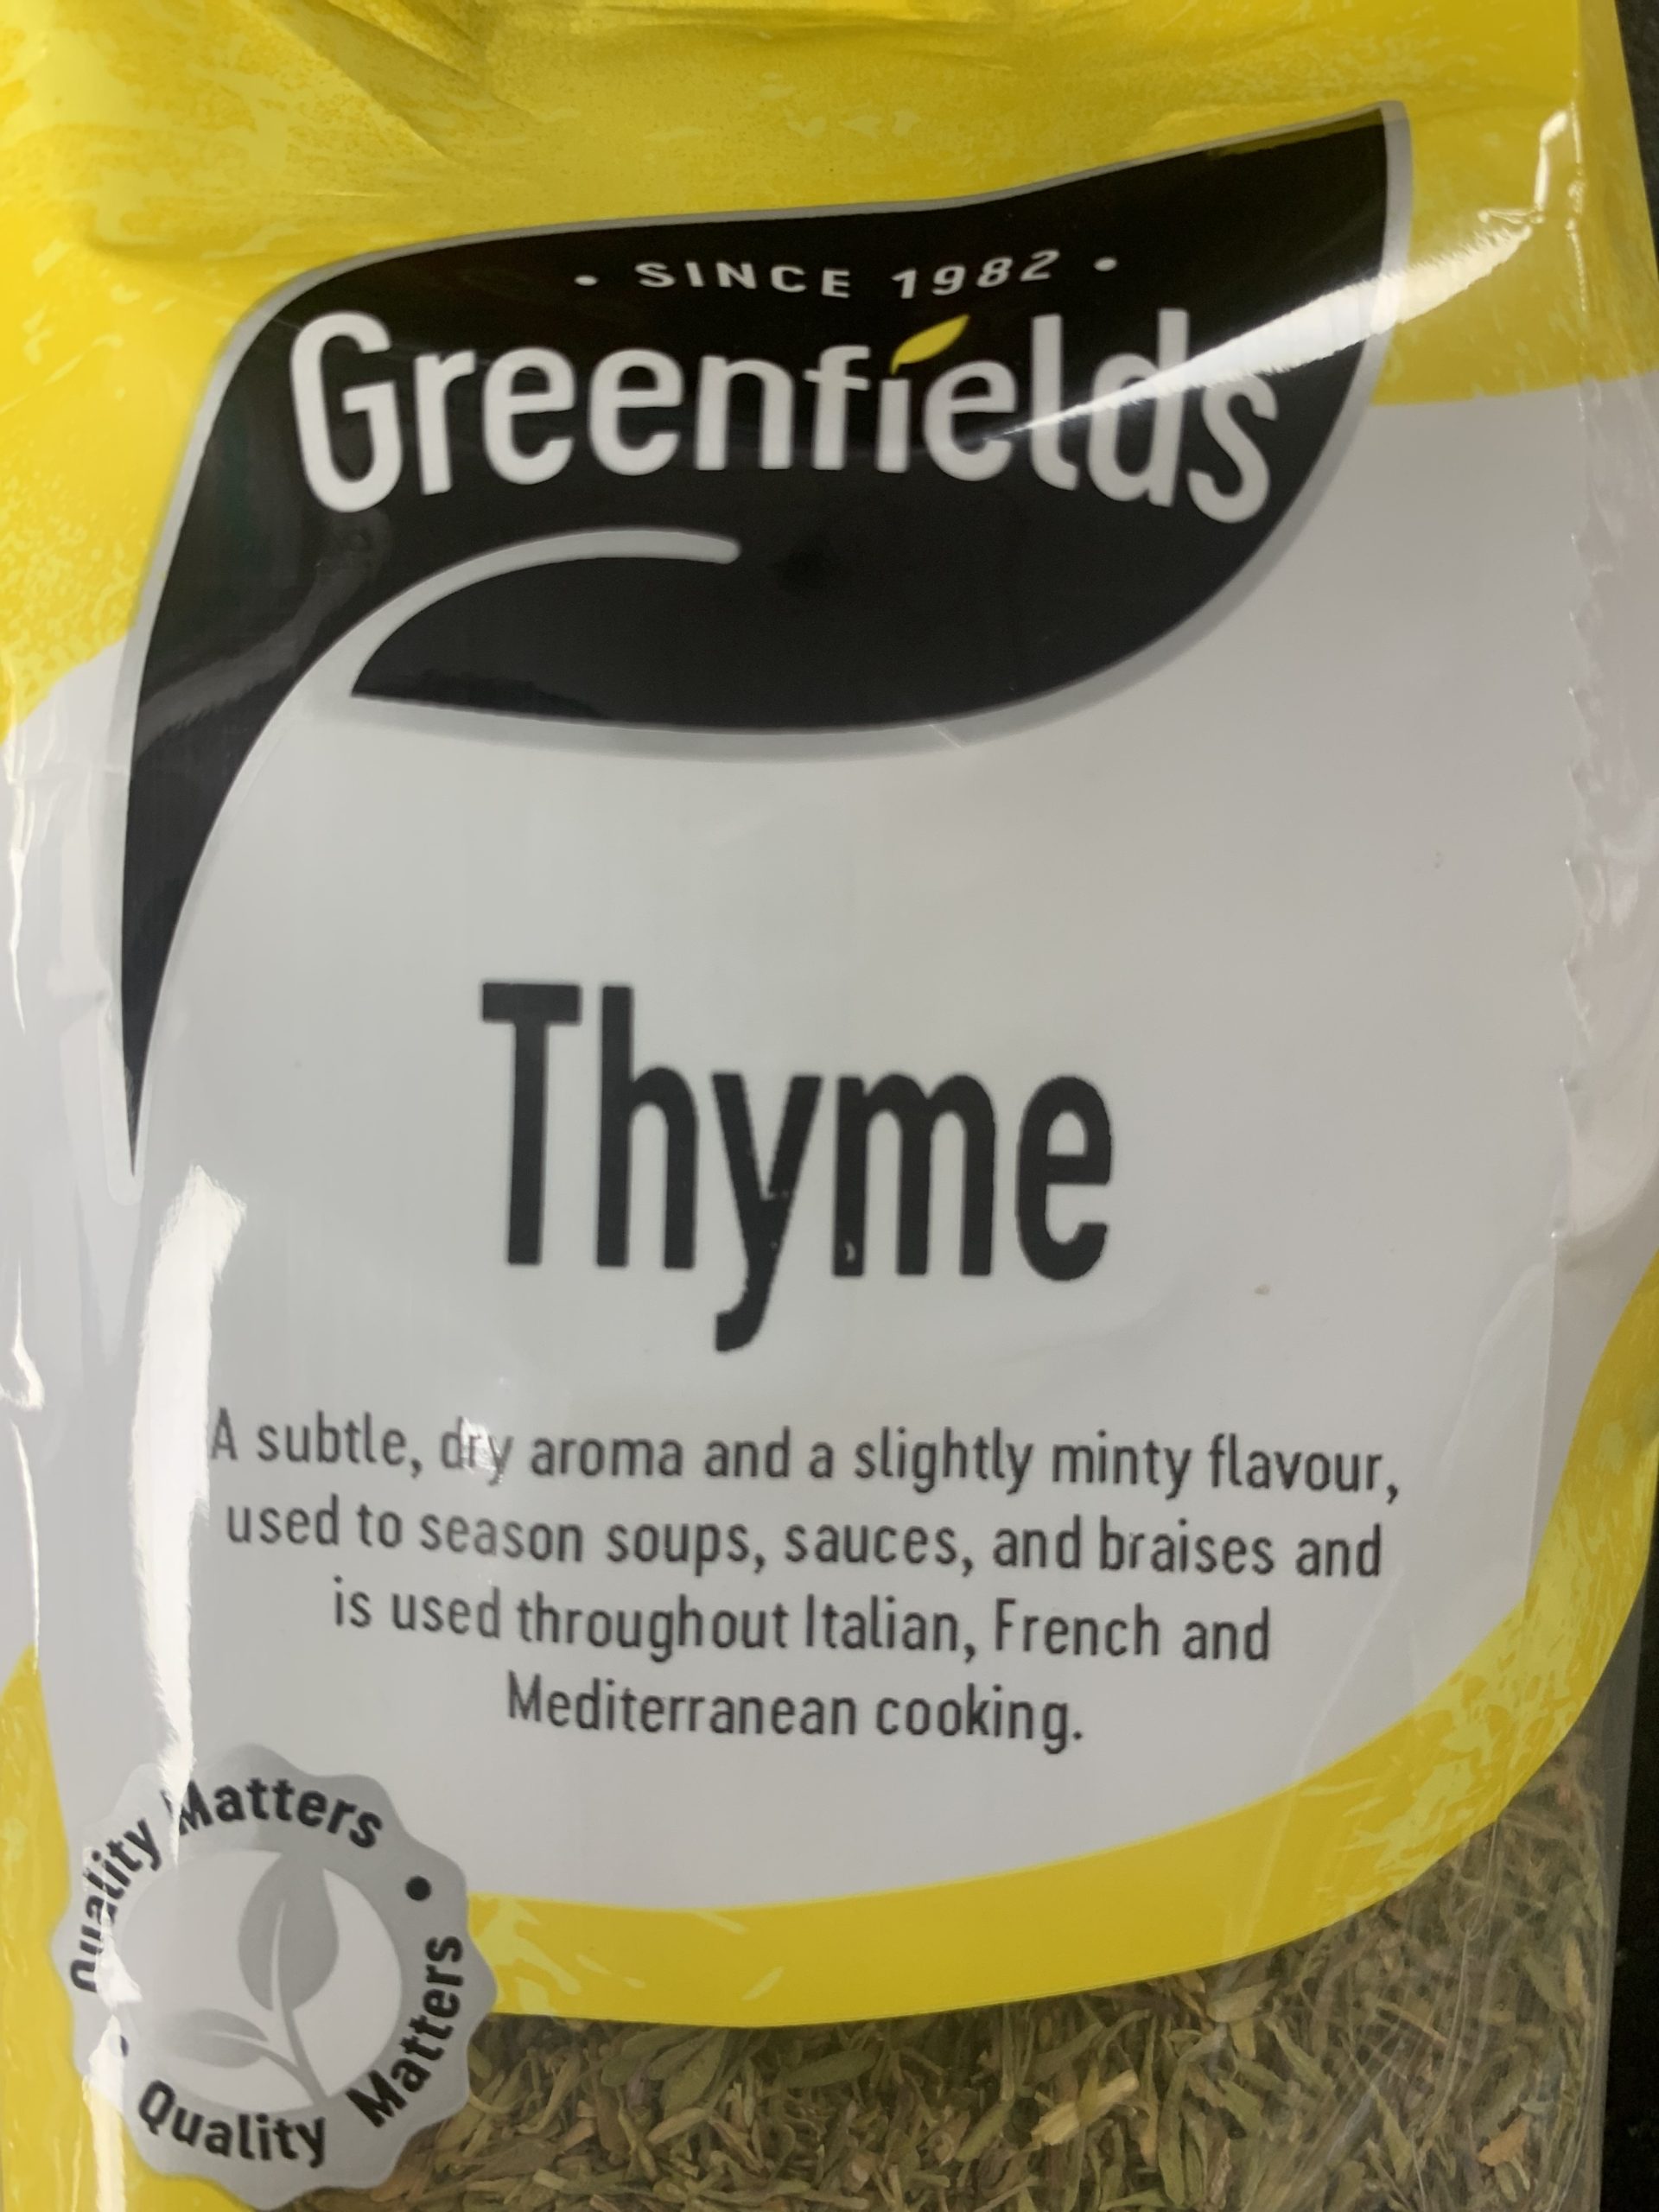 Greenfields Thyme 75g